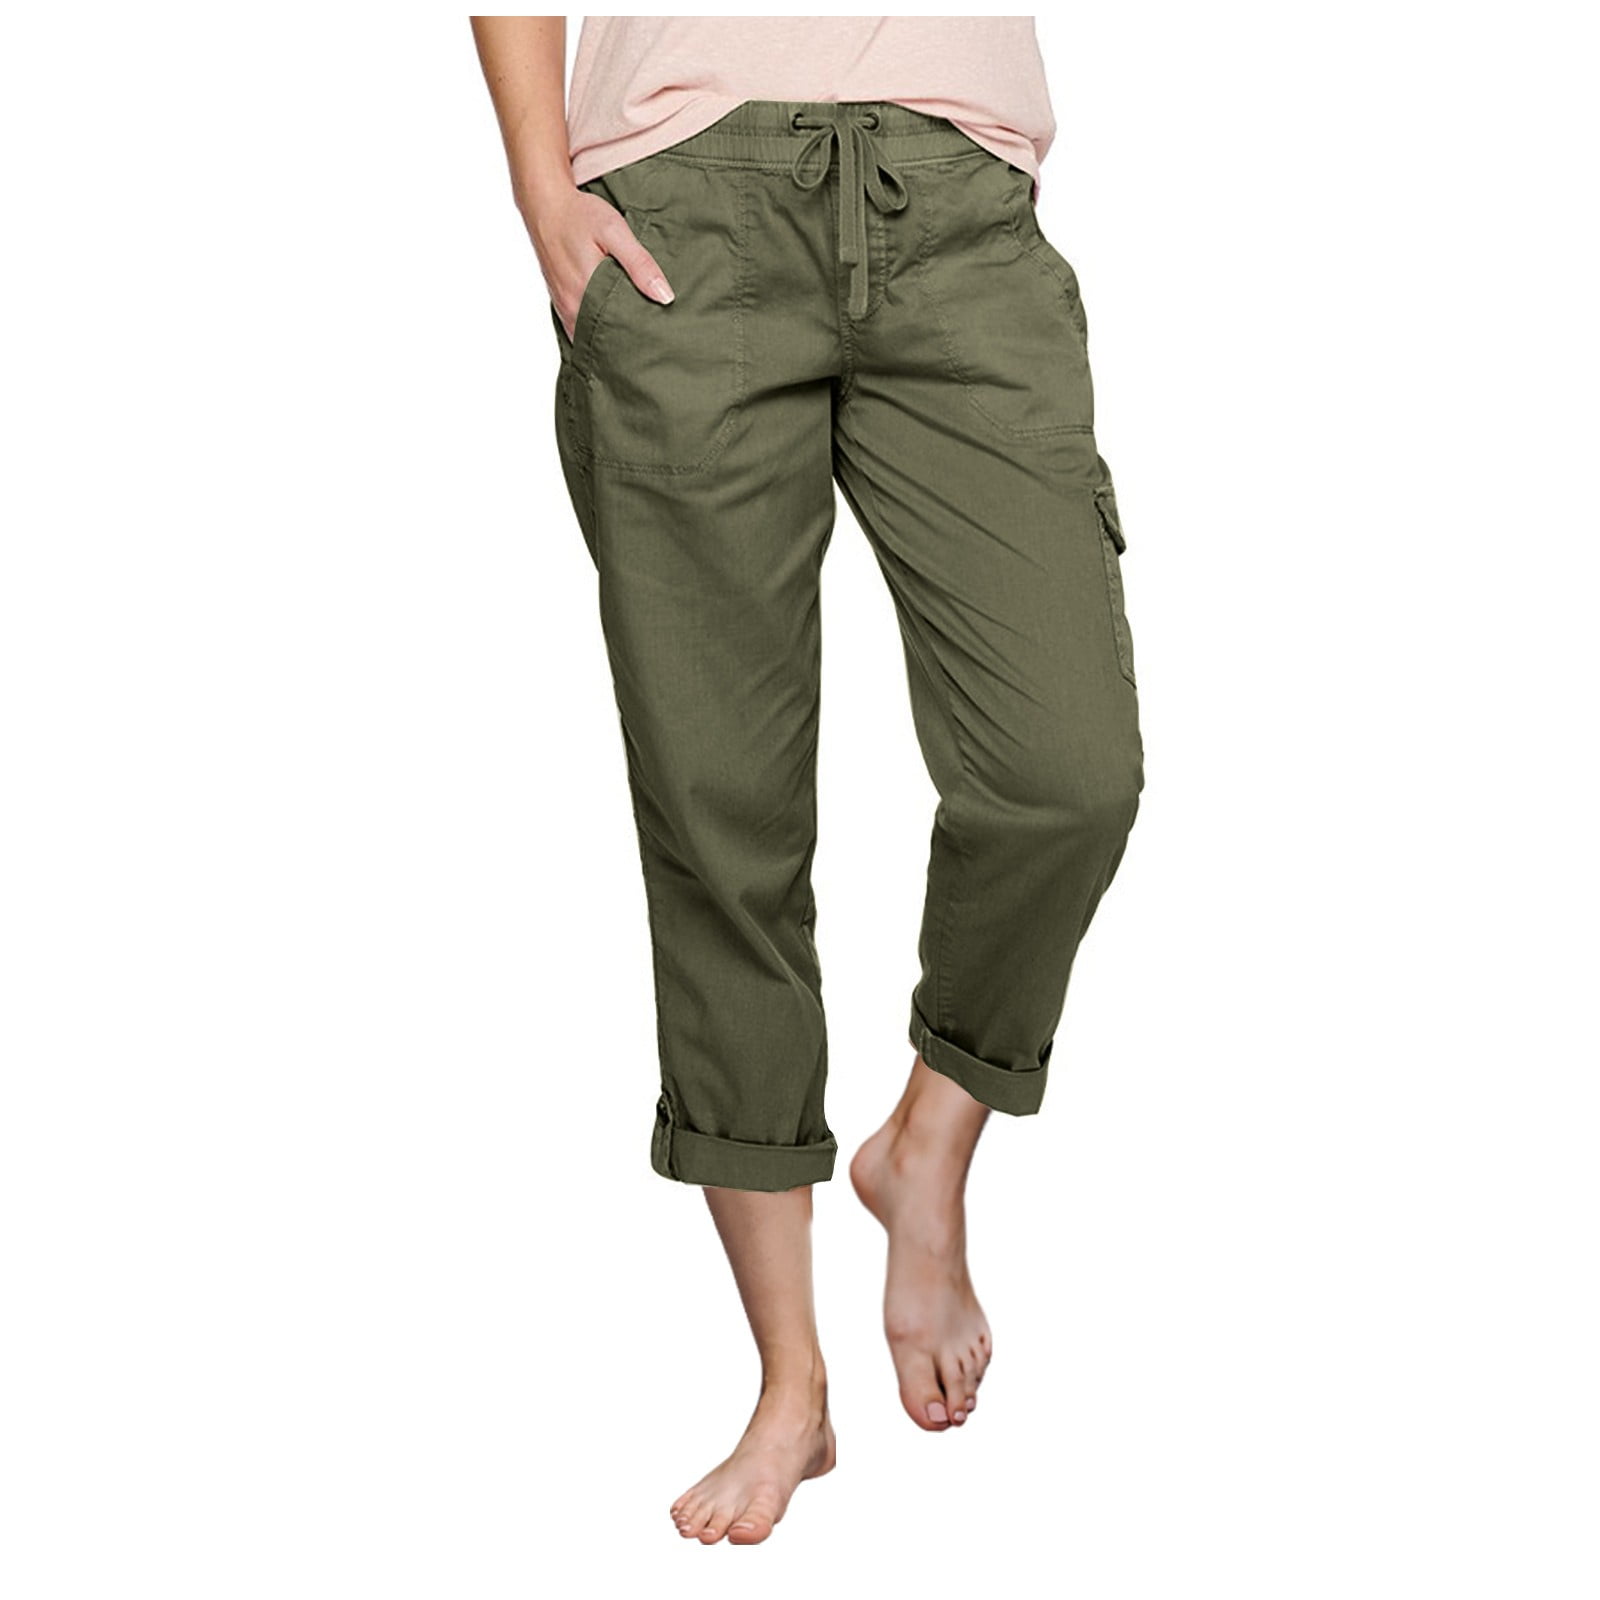 Cargo Pants Women with 6 Pockets Scrub Lightweight Hiking Pants High Rise  Drawstring Joggers Workout Pants Casual Outdoor